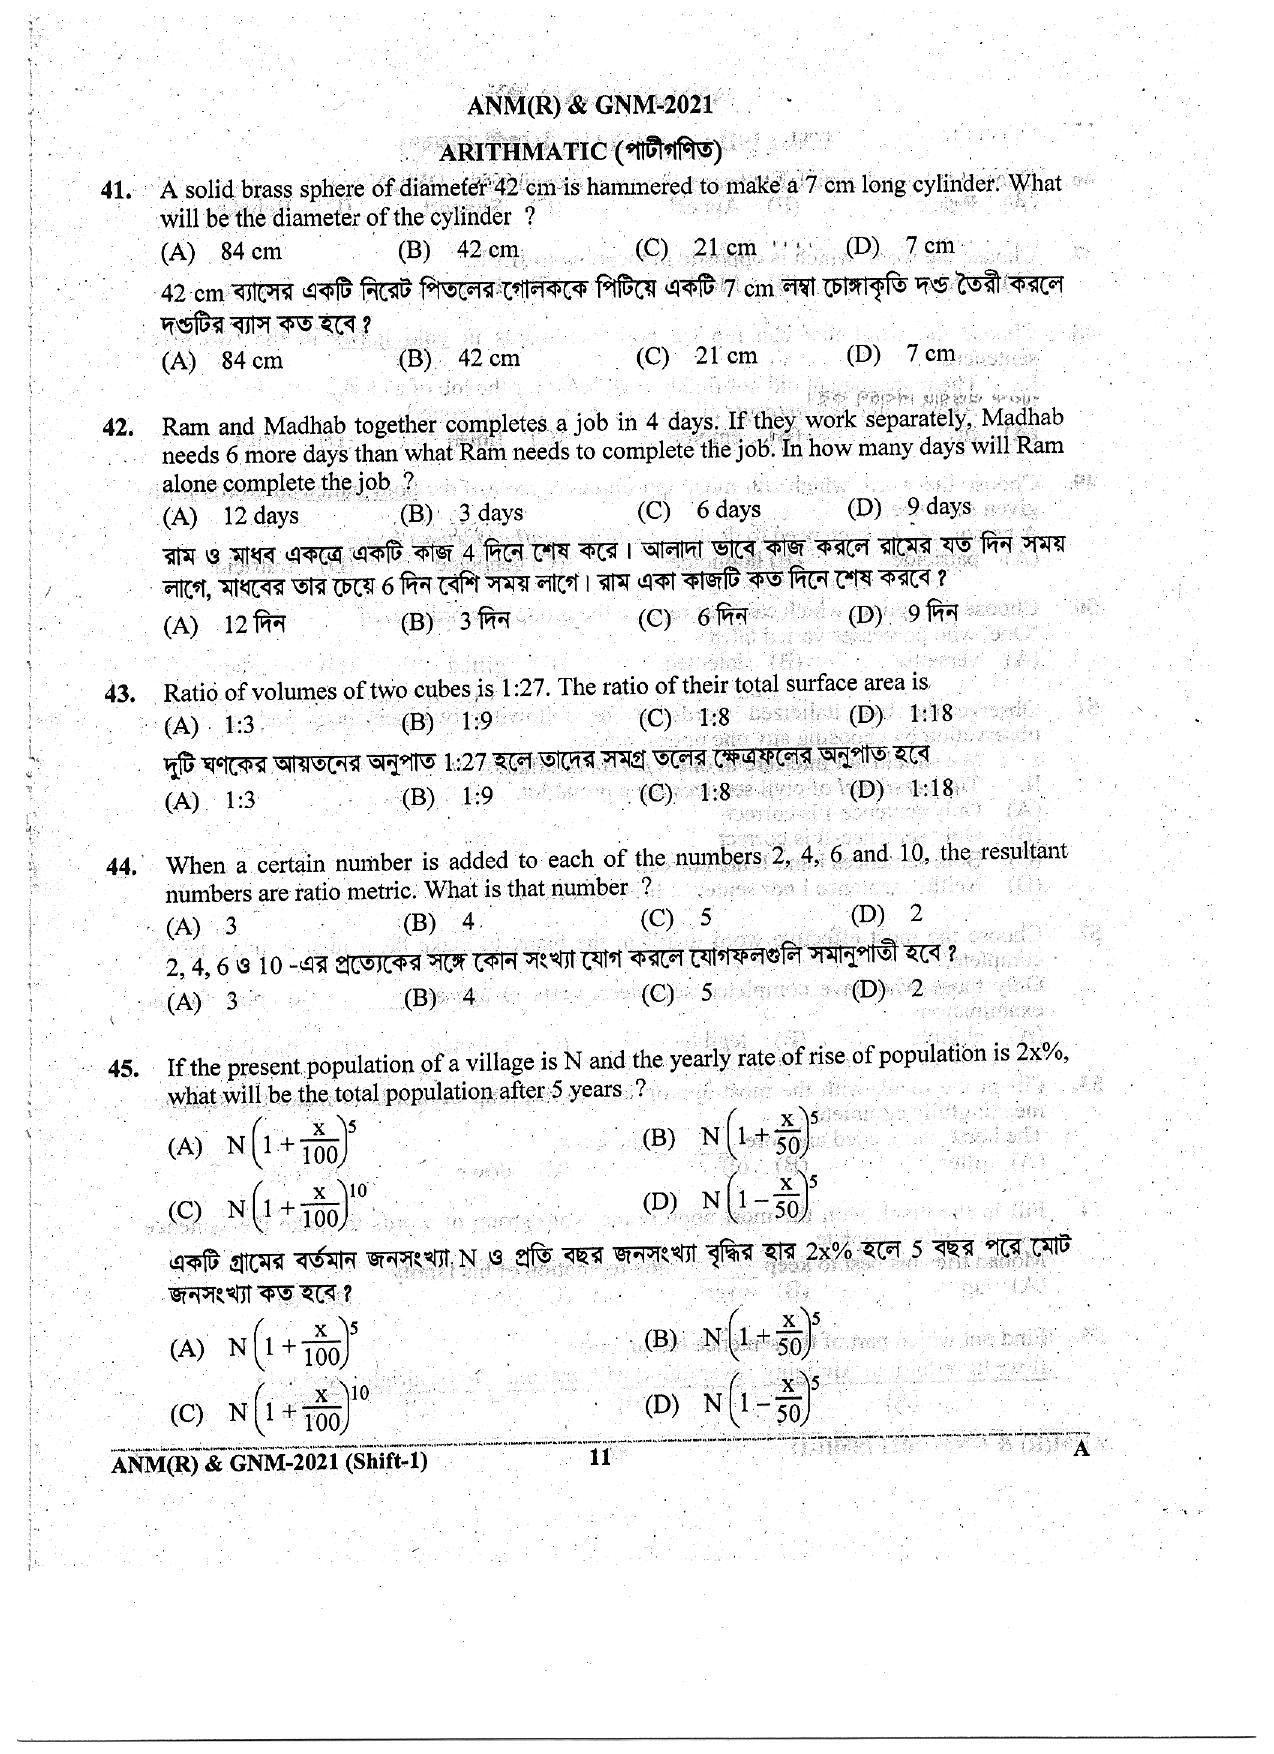 WB ANM GNM 2021 Session I Question Paper - Page 11